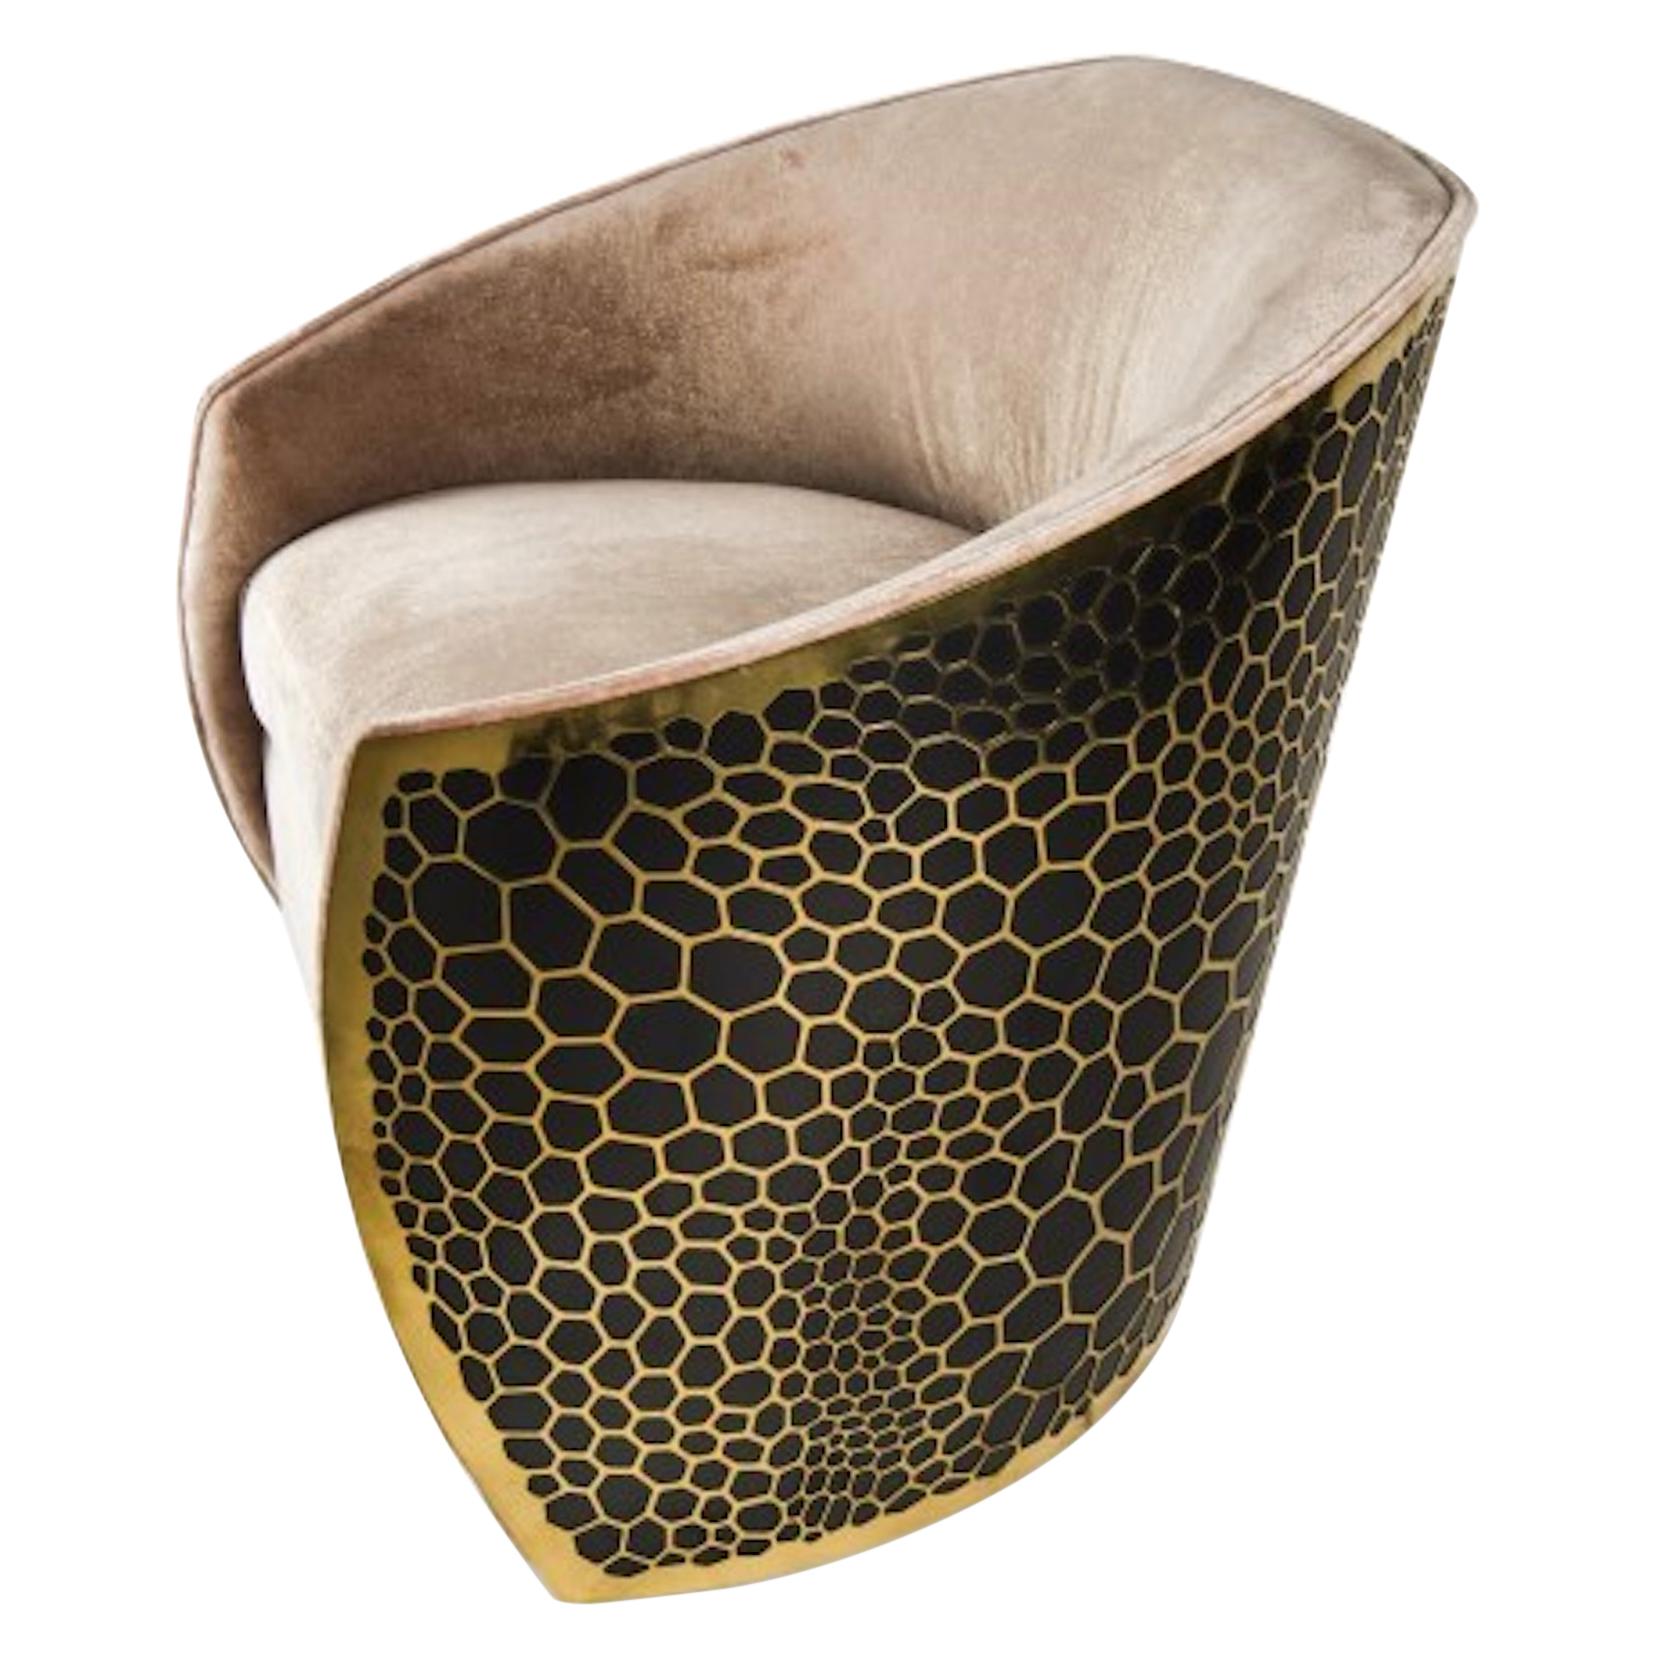 "Cellules" Armchair by Erwan Boulloud at Cost Price